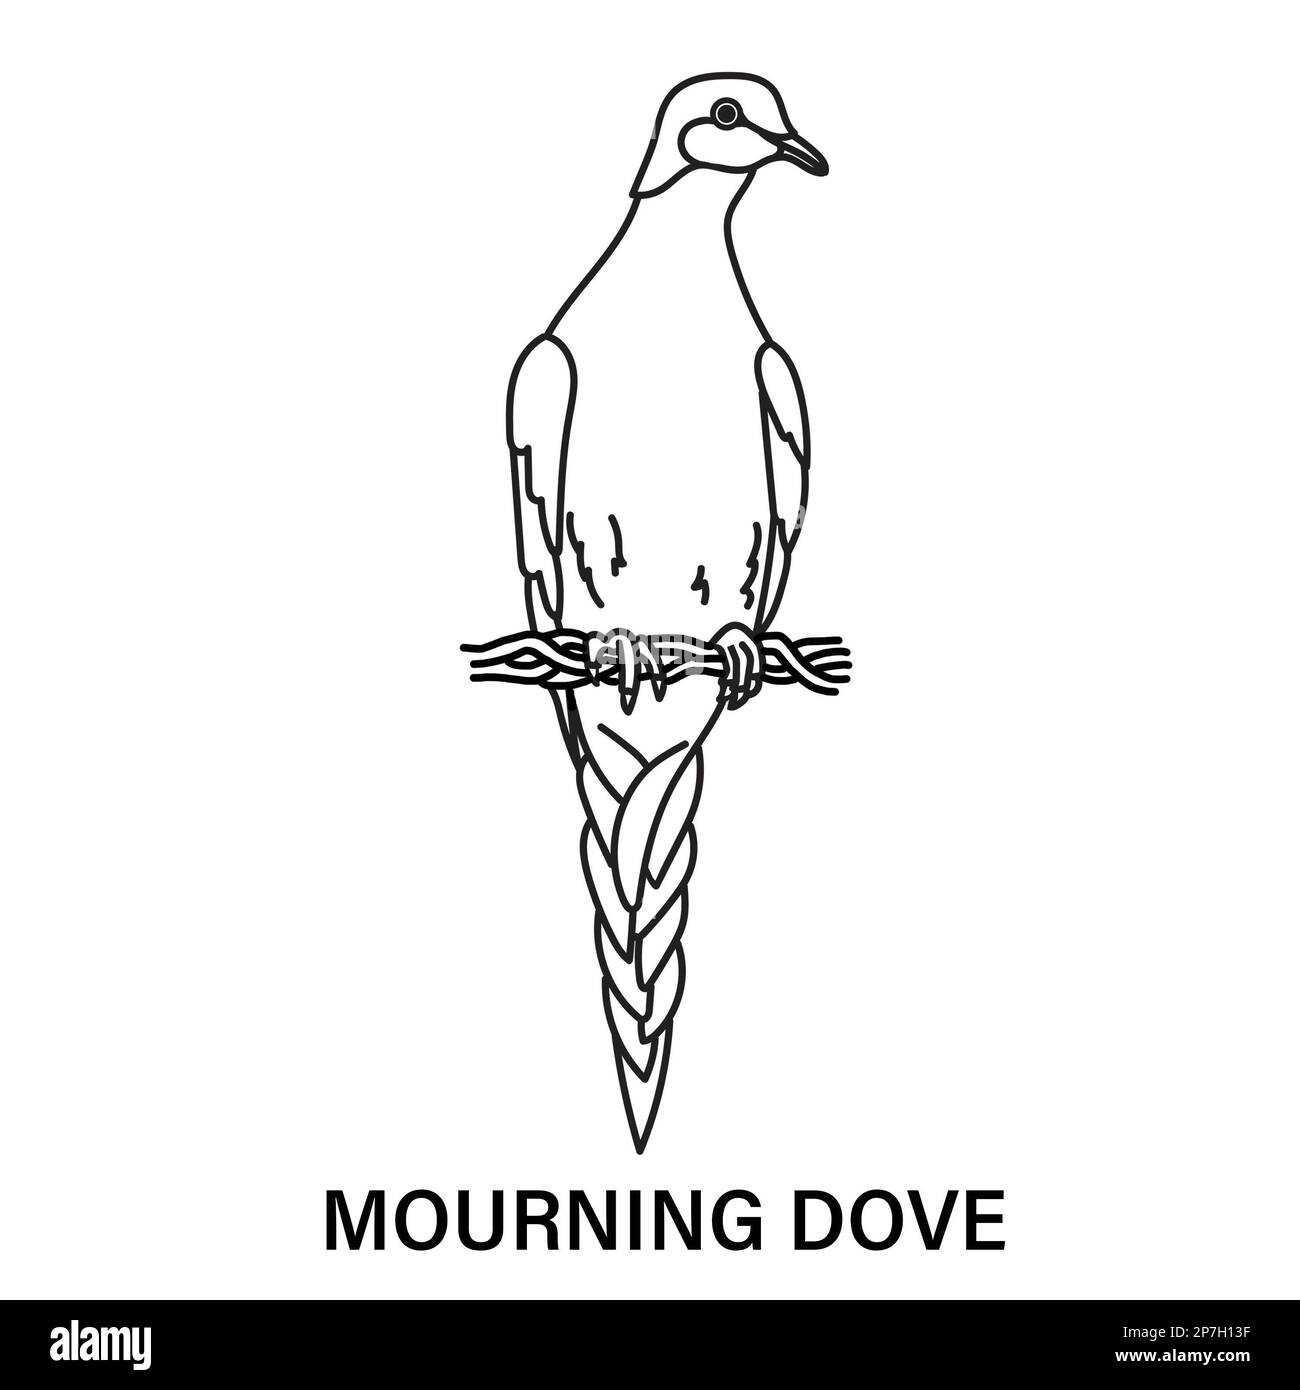 Illustration of a male mourning dove, or turtle dove, on a white background. Coloring page for fun or learning. Stock Photo